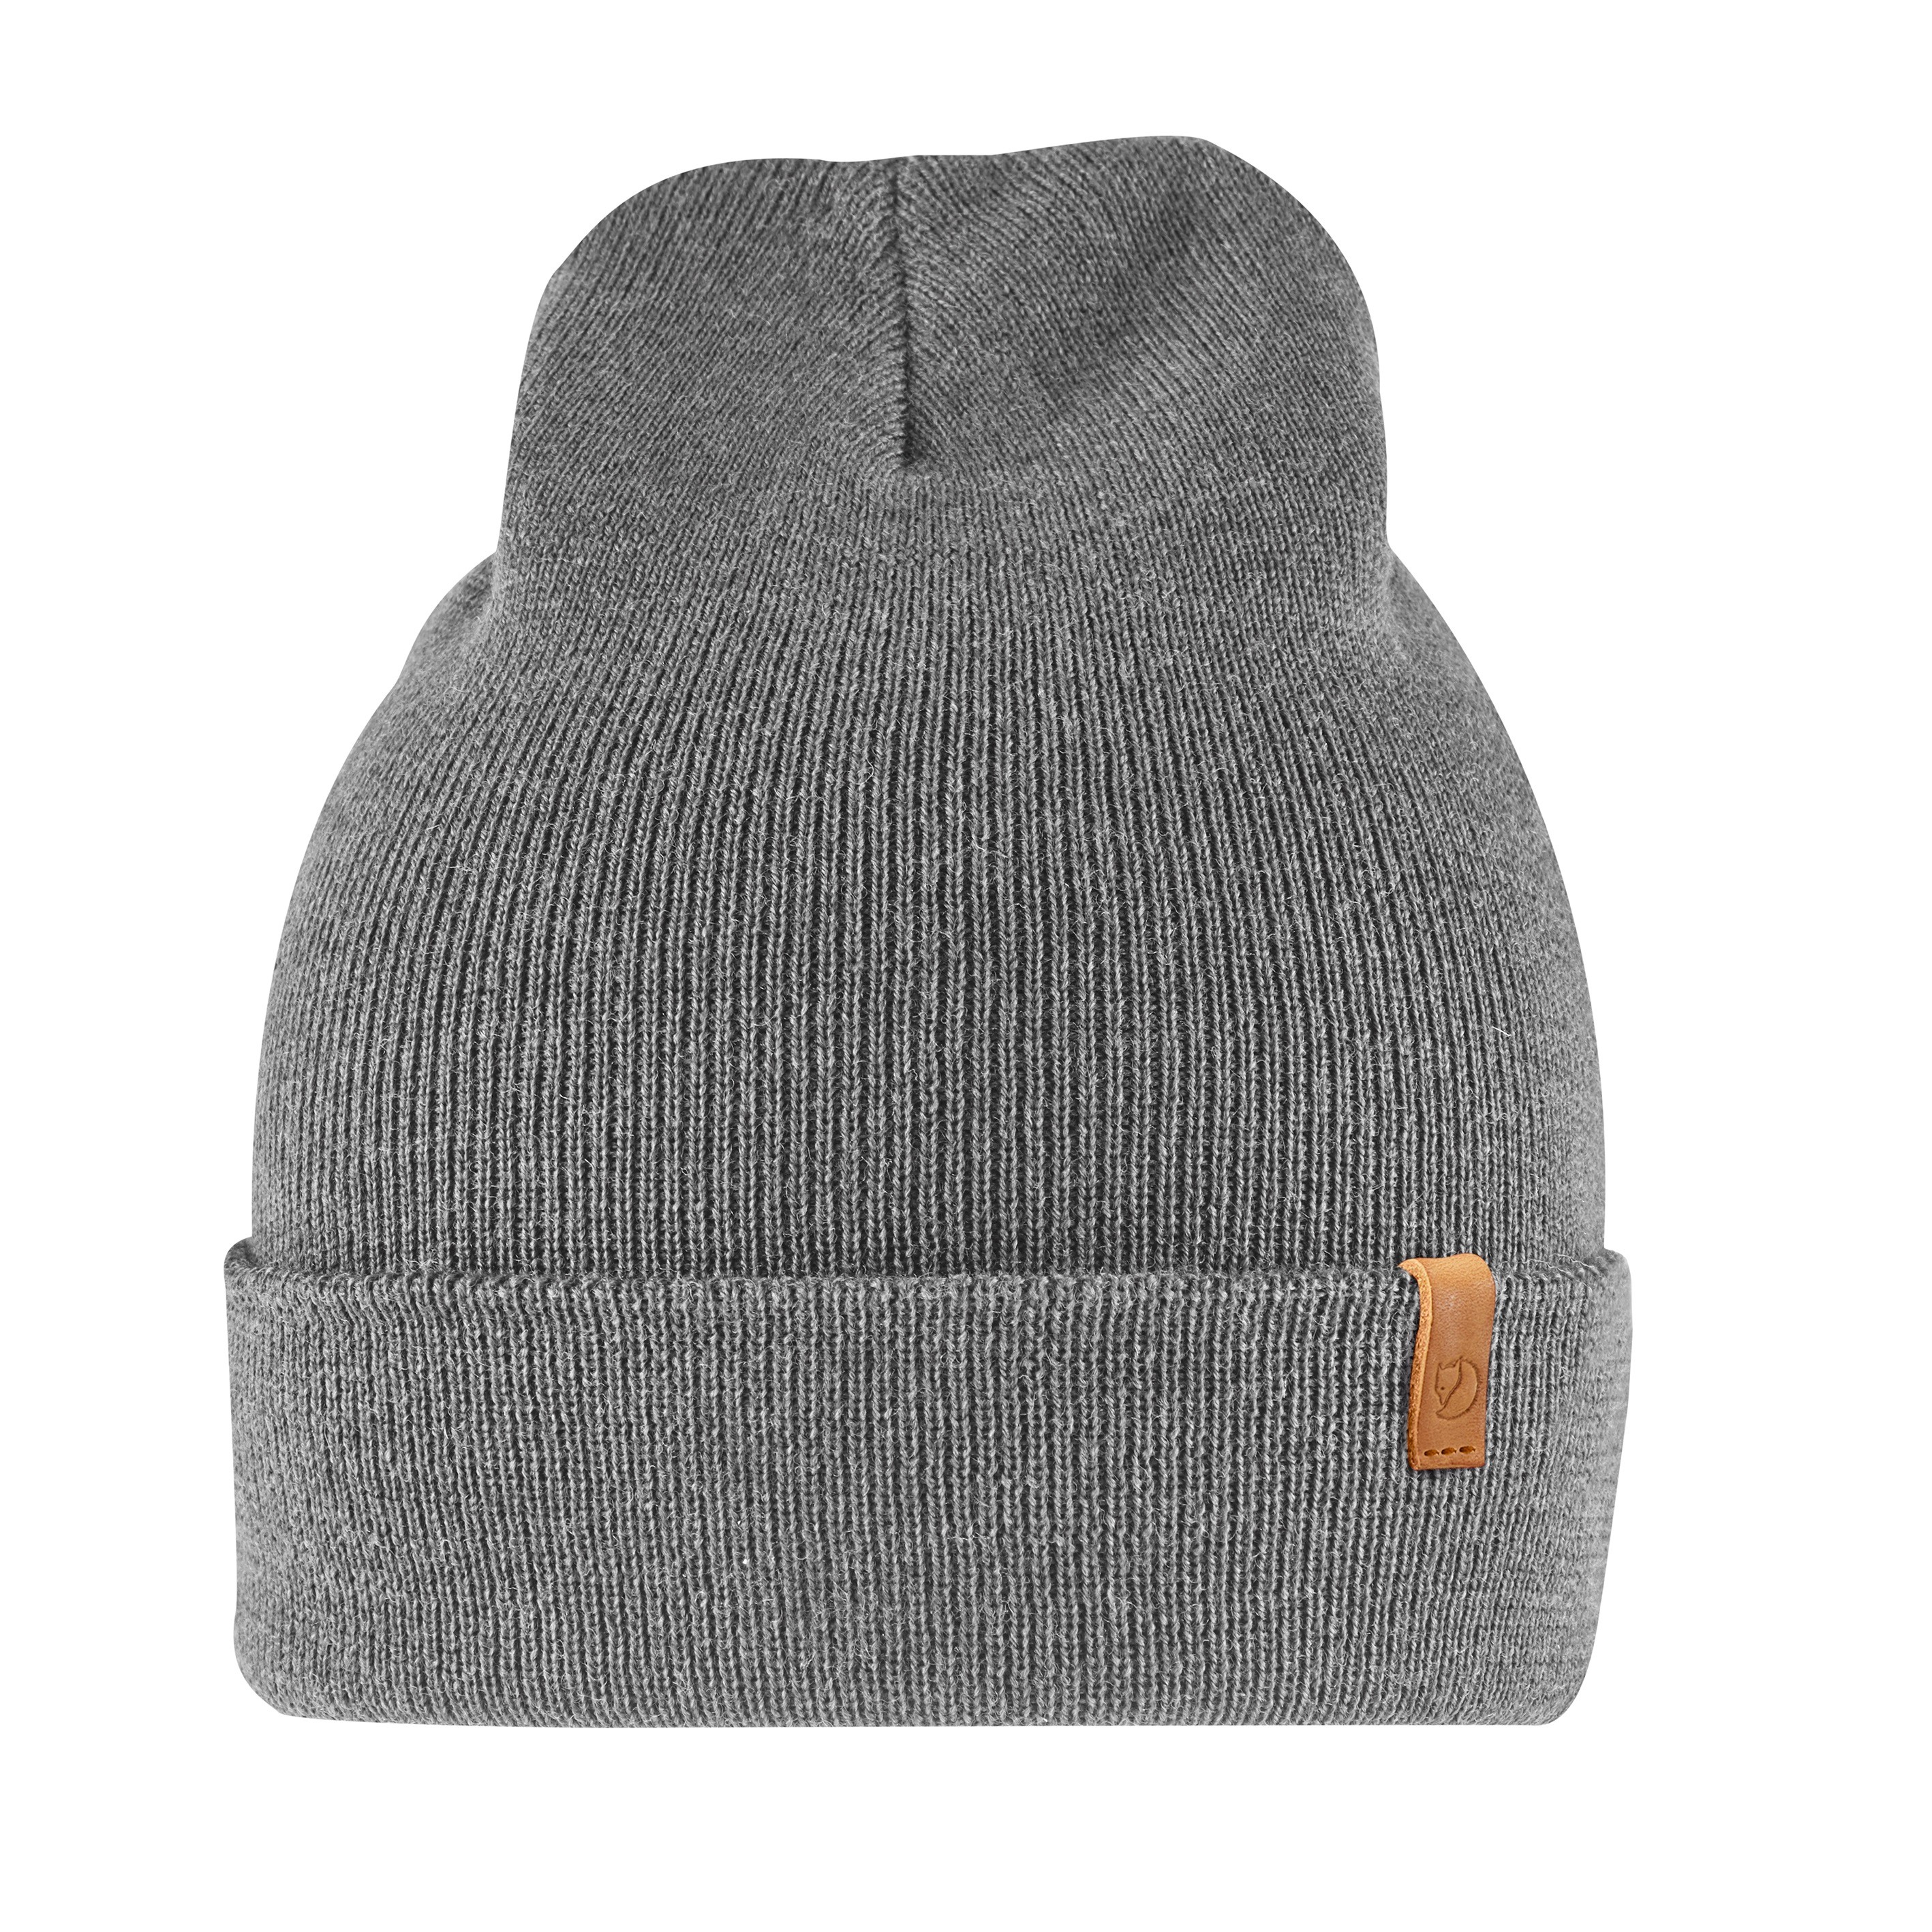 Classic Knit Hat Grey, Buy Classic Knit Hat Grey here